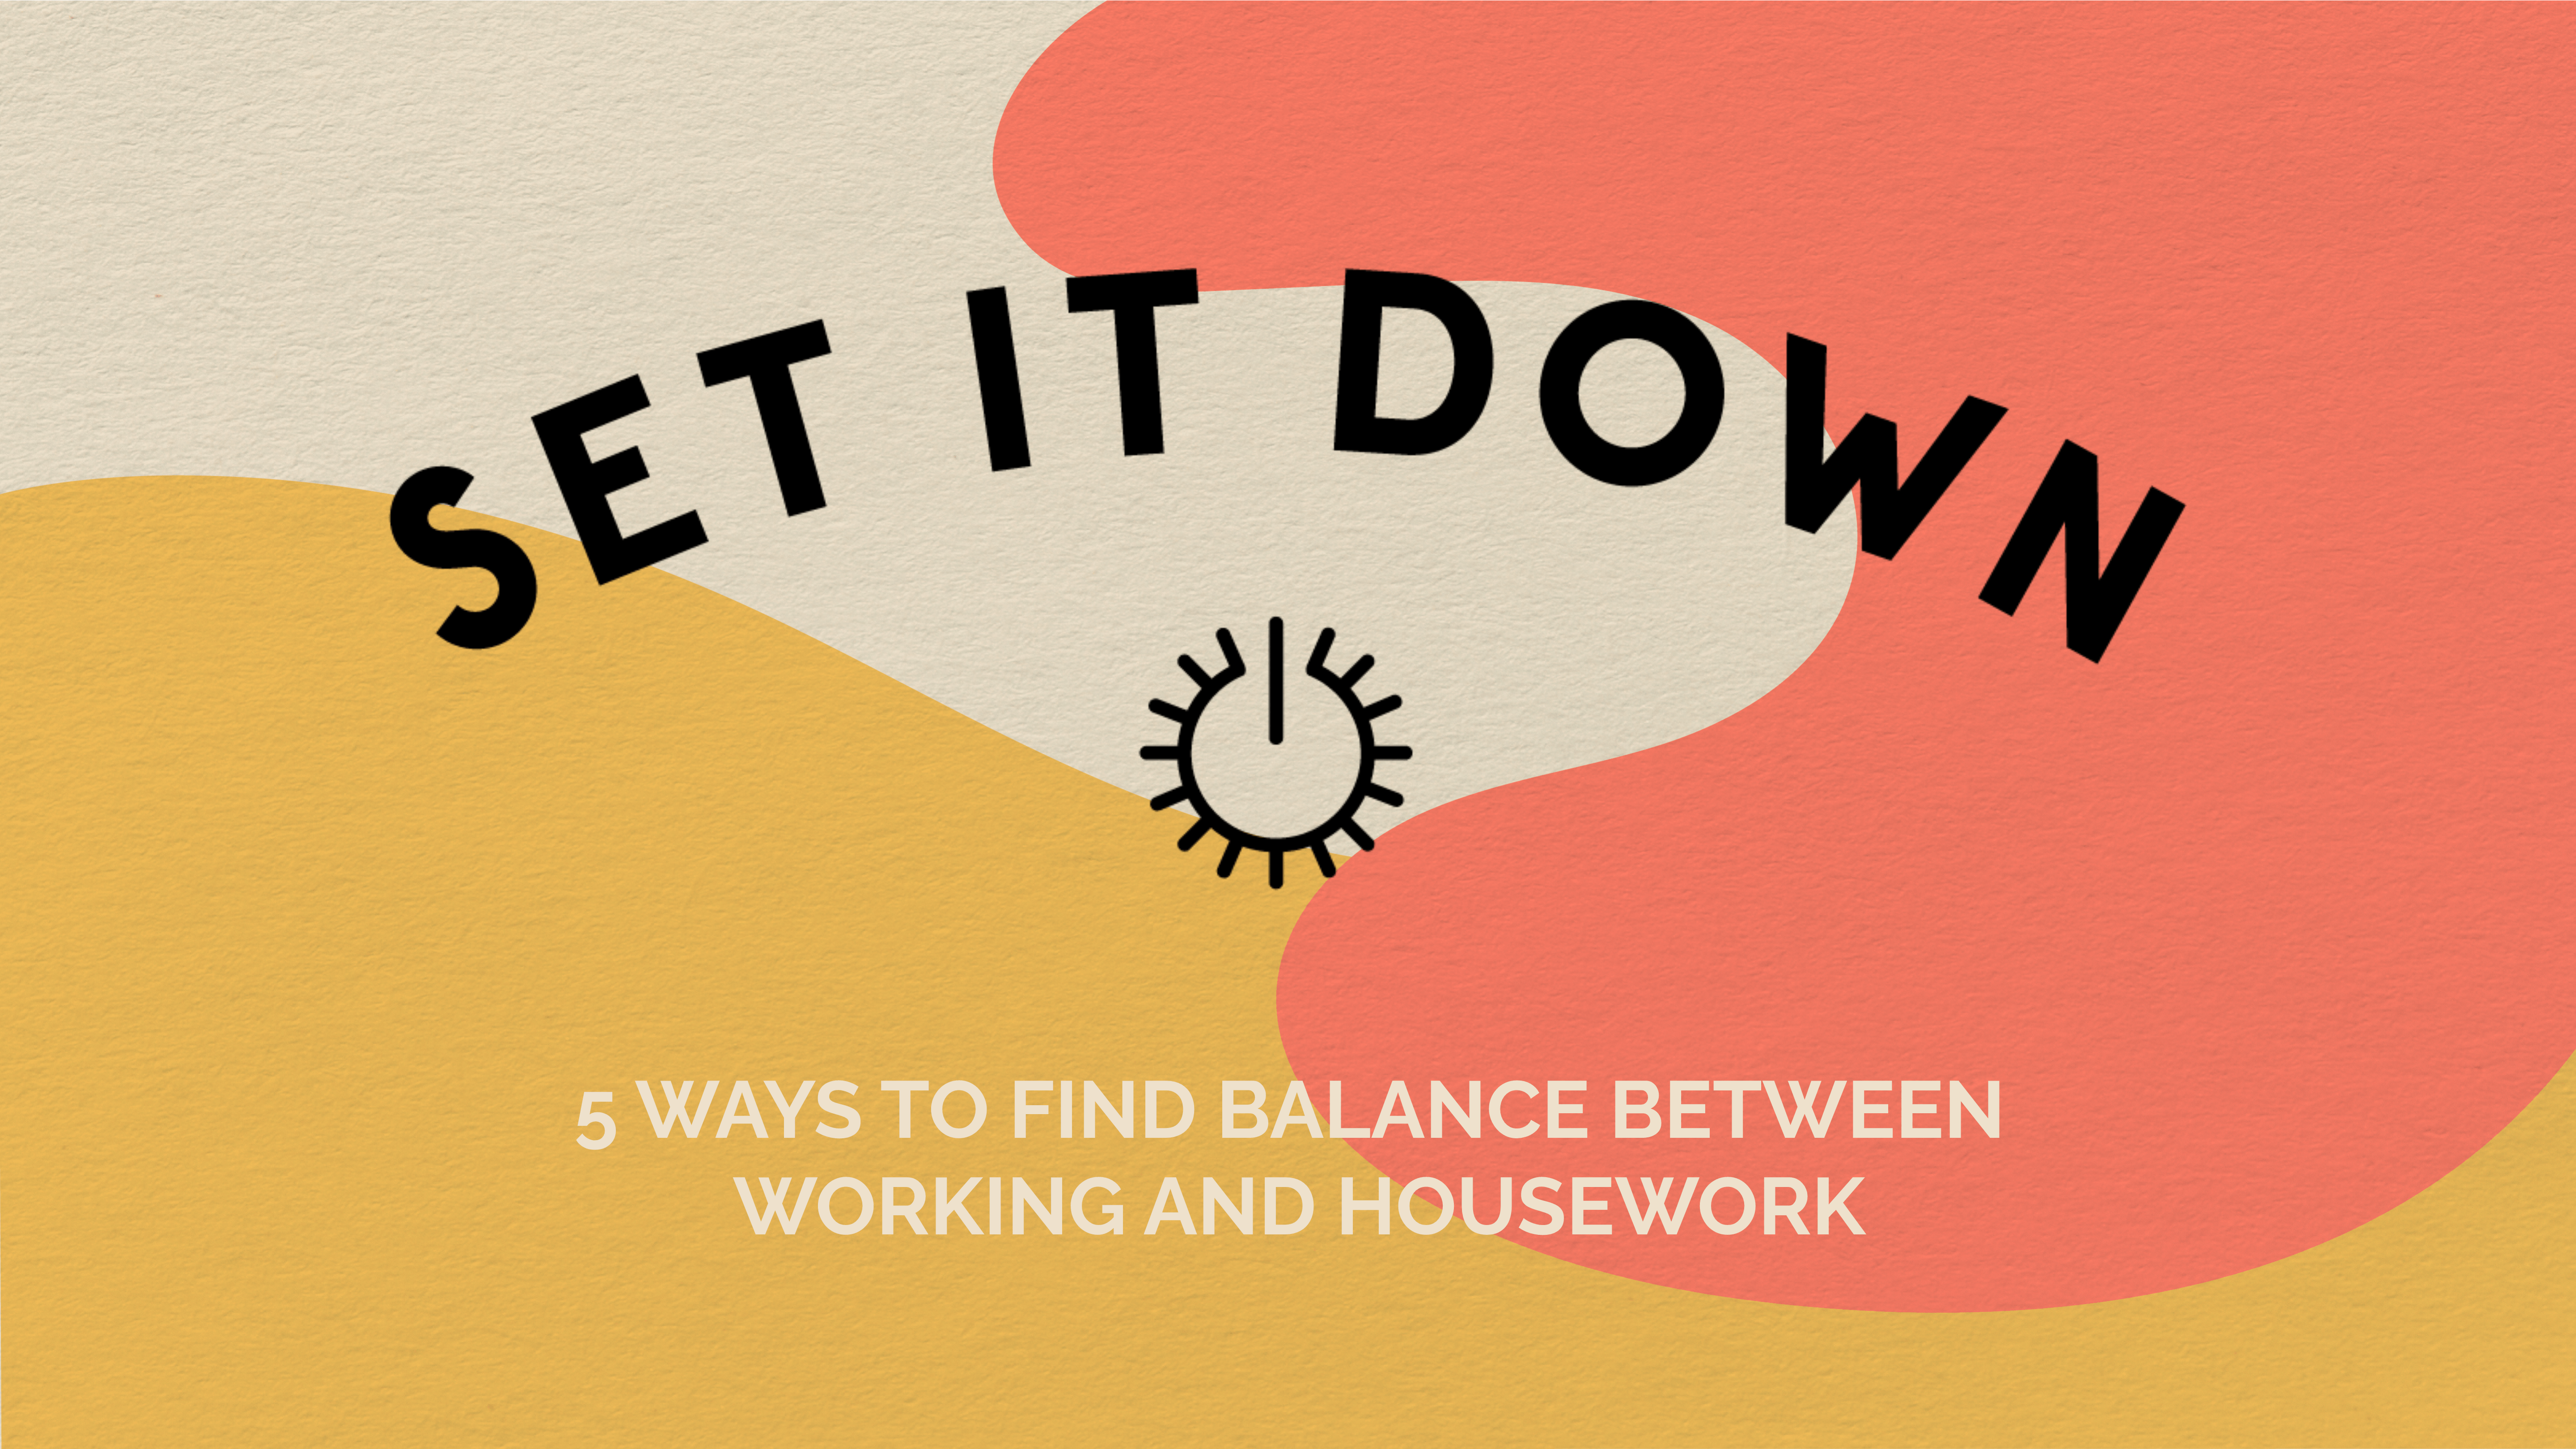 Set it Down - 5 ways to find balance between working and housework